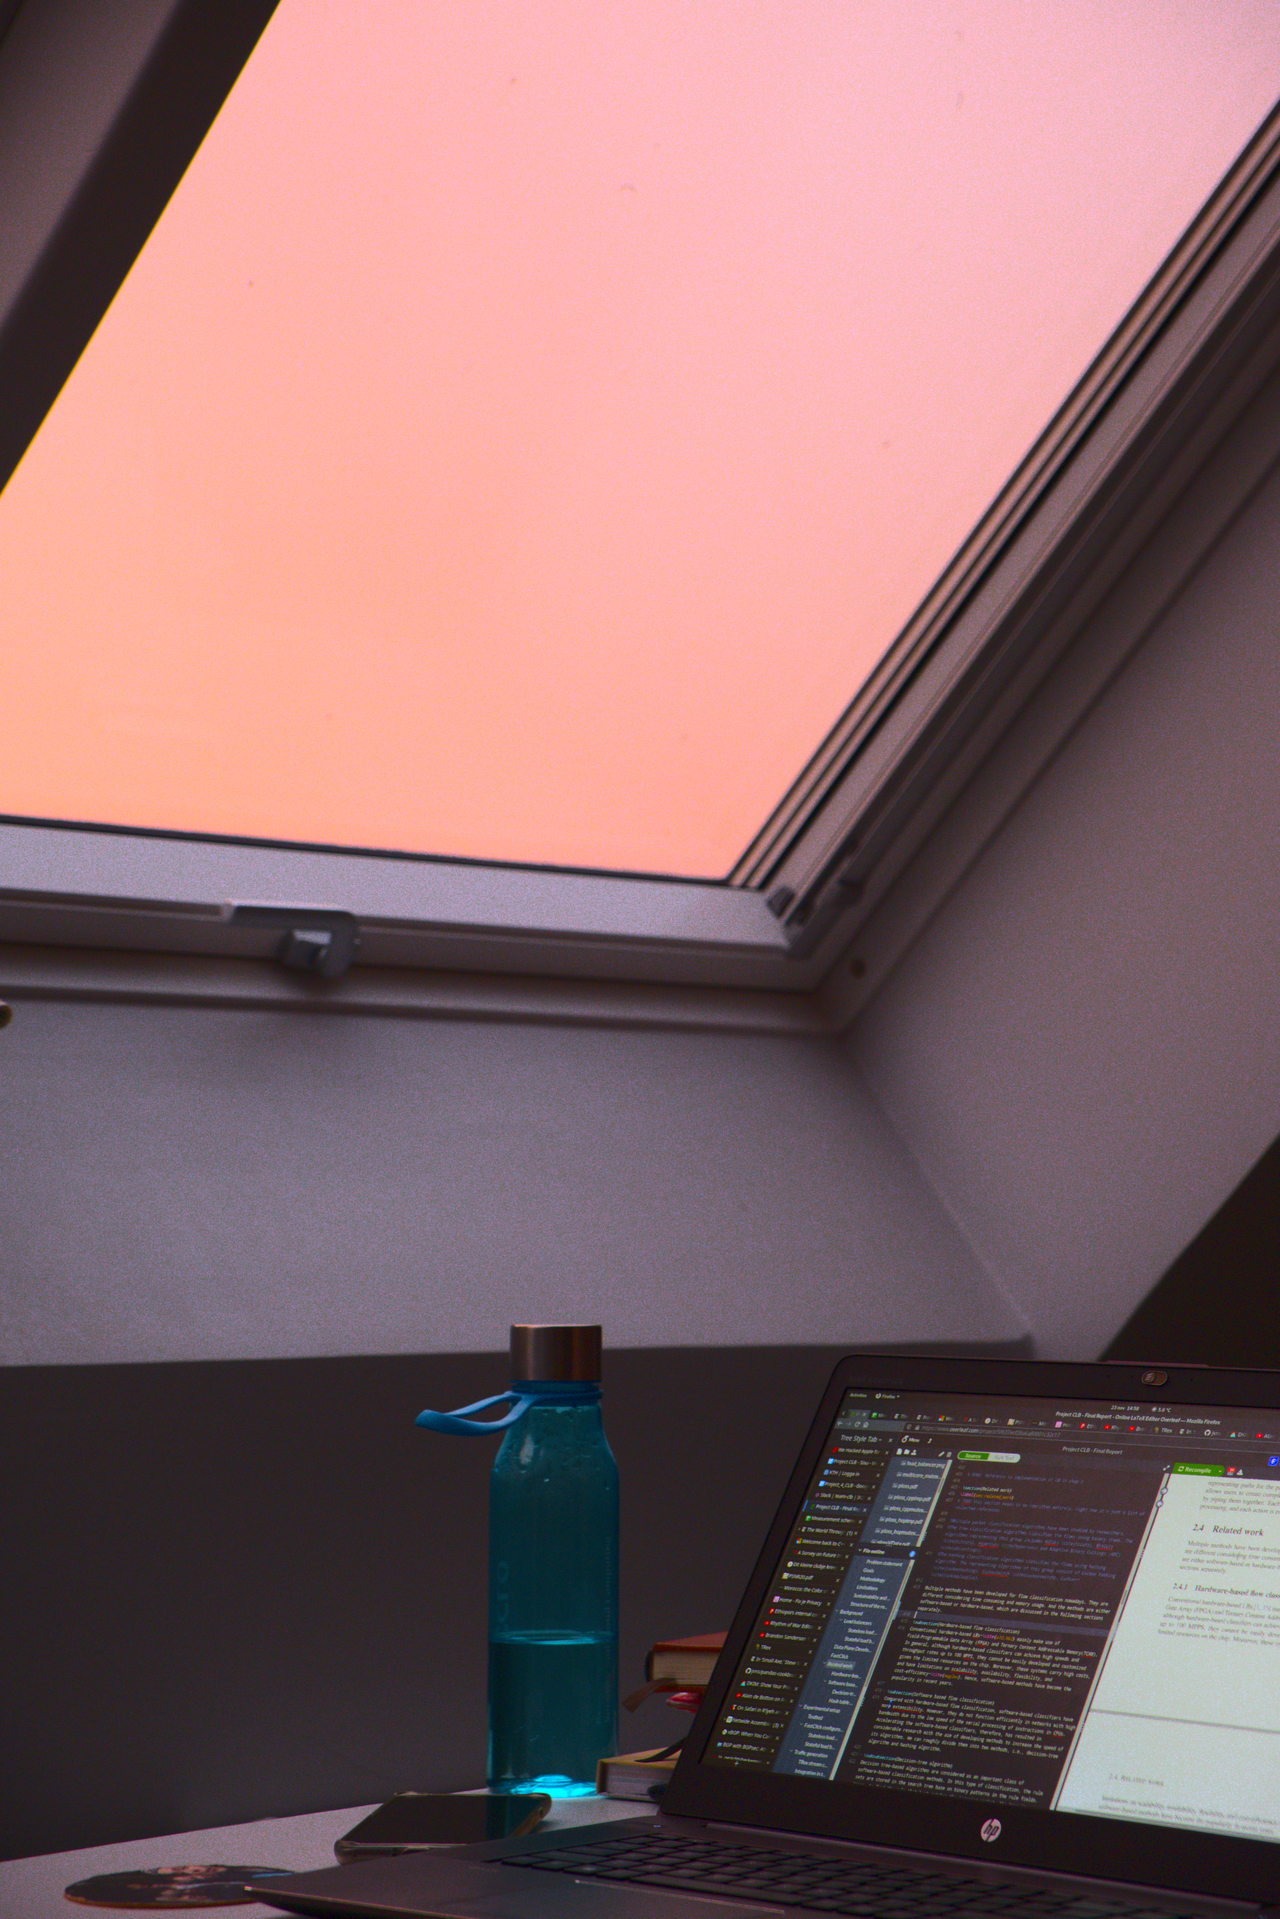 The room in which I have been working all semester long, during one of the beautiful sunsets.